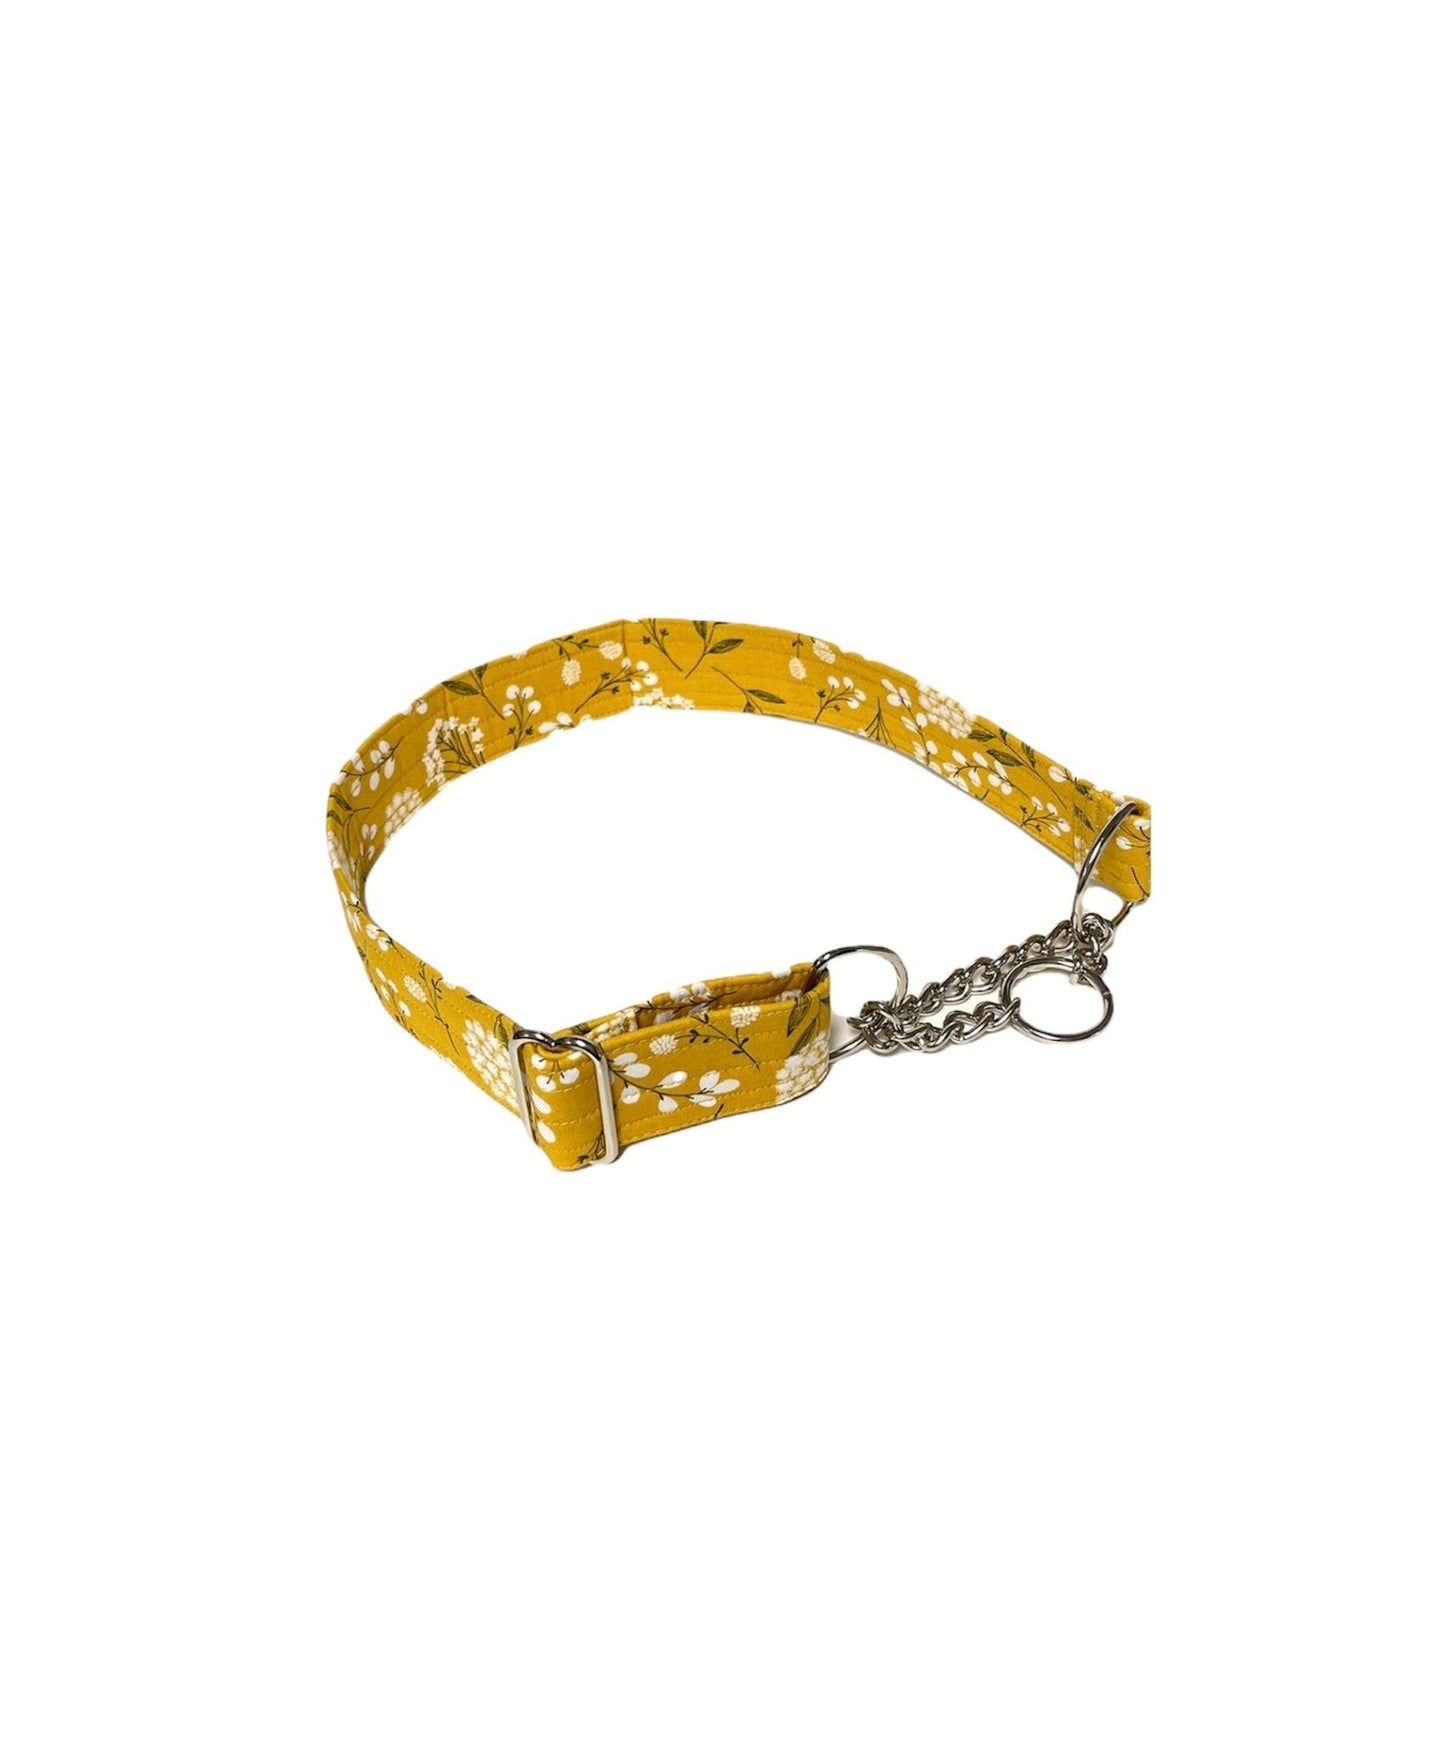 example collar in yellow #37 floral print